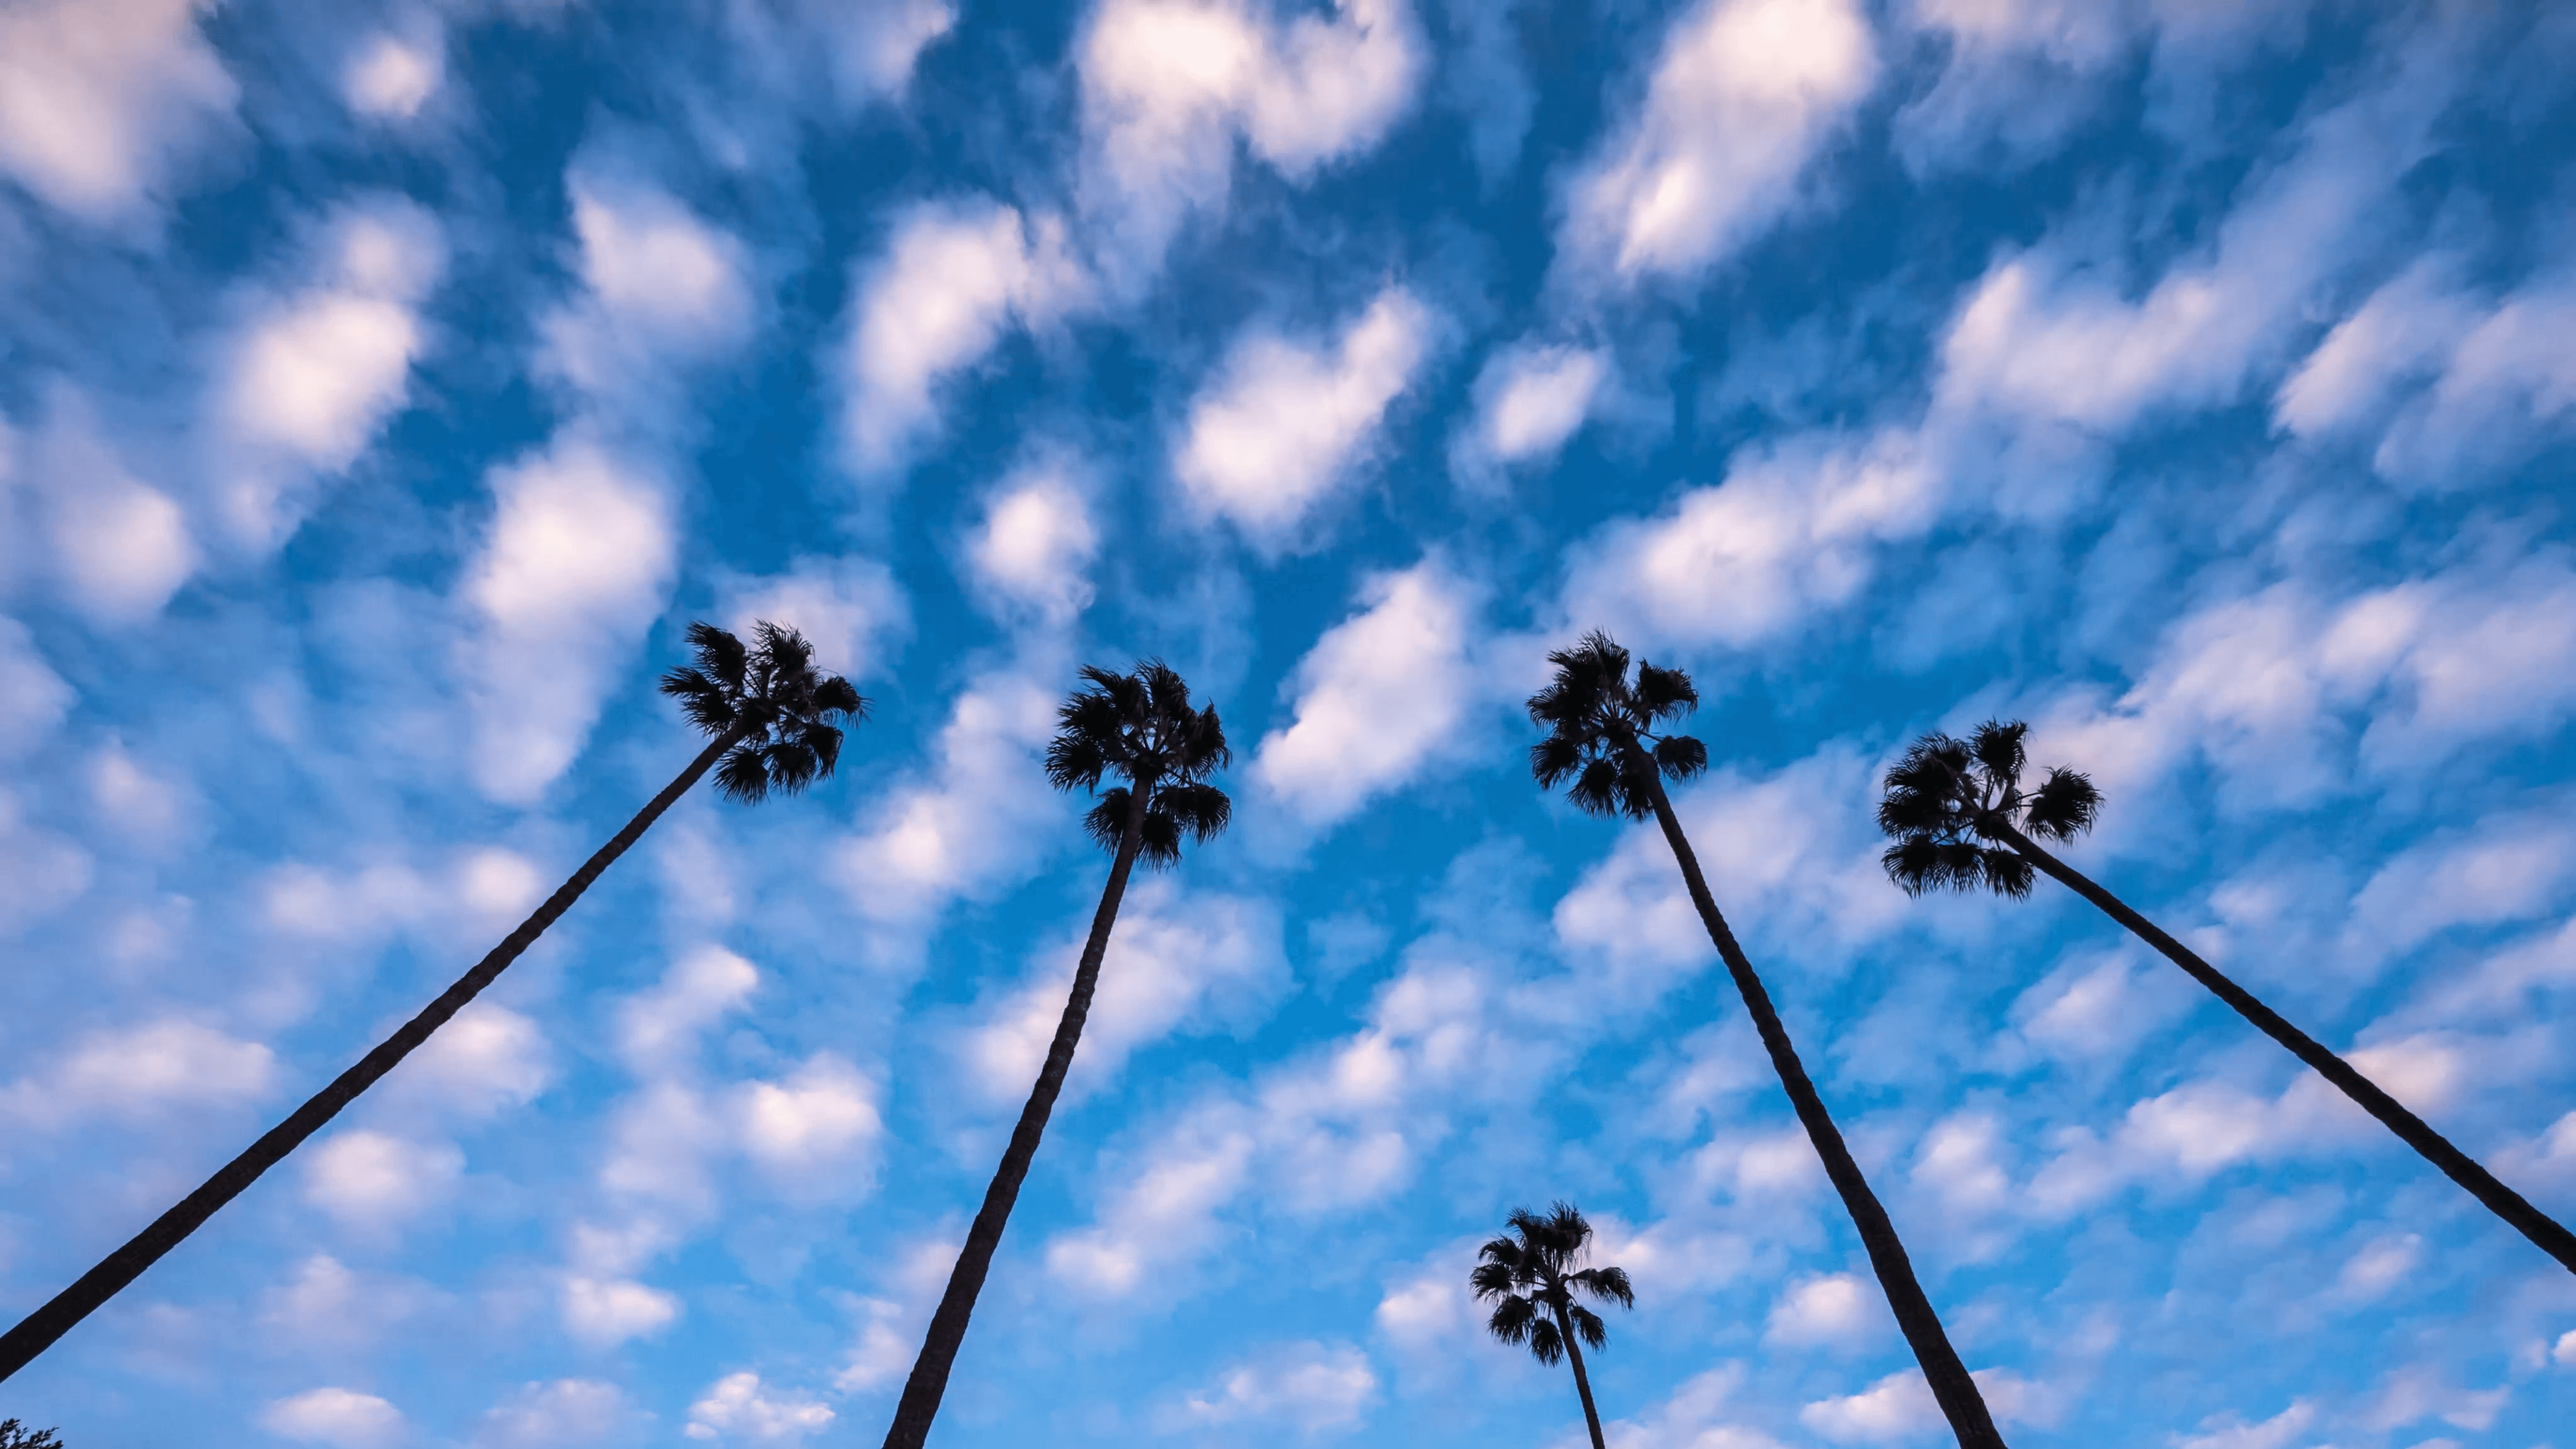 Palm trees against moving clouds over blue sky background. 4K